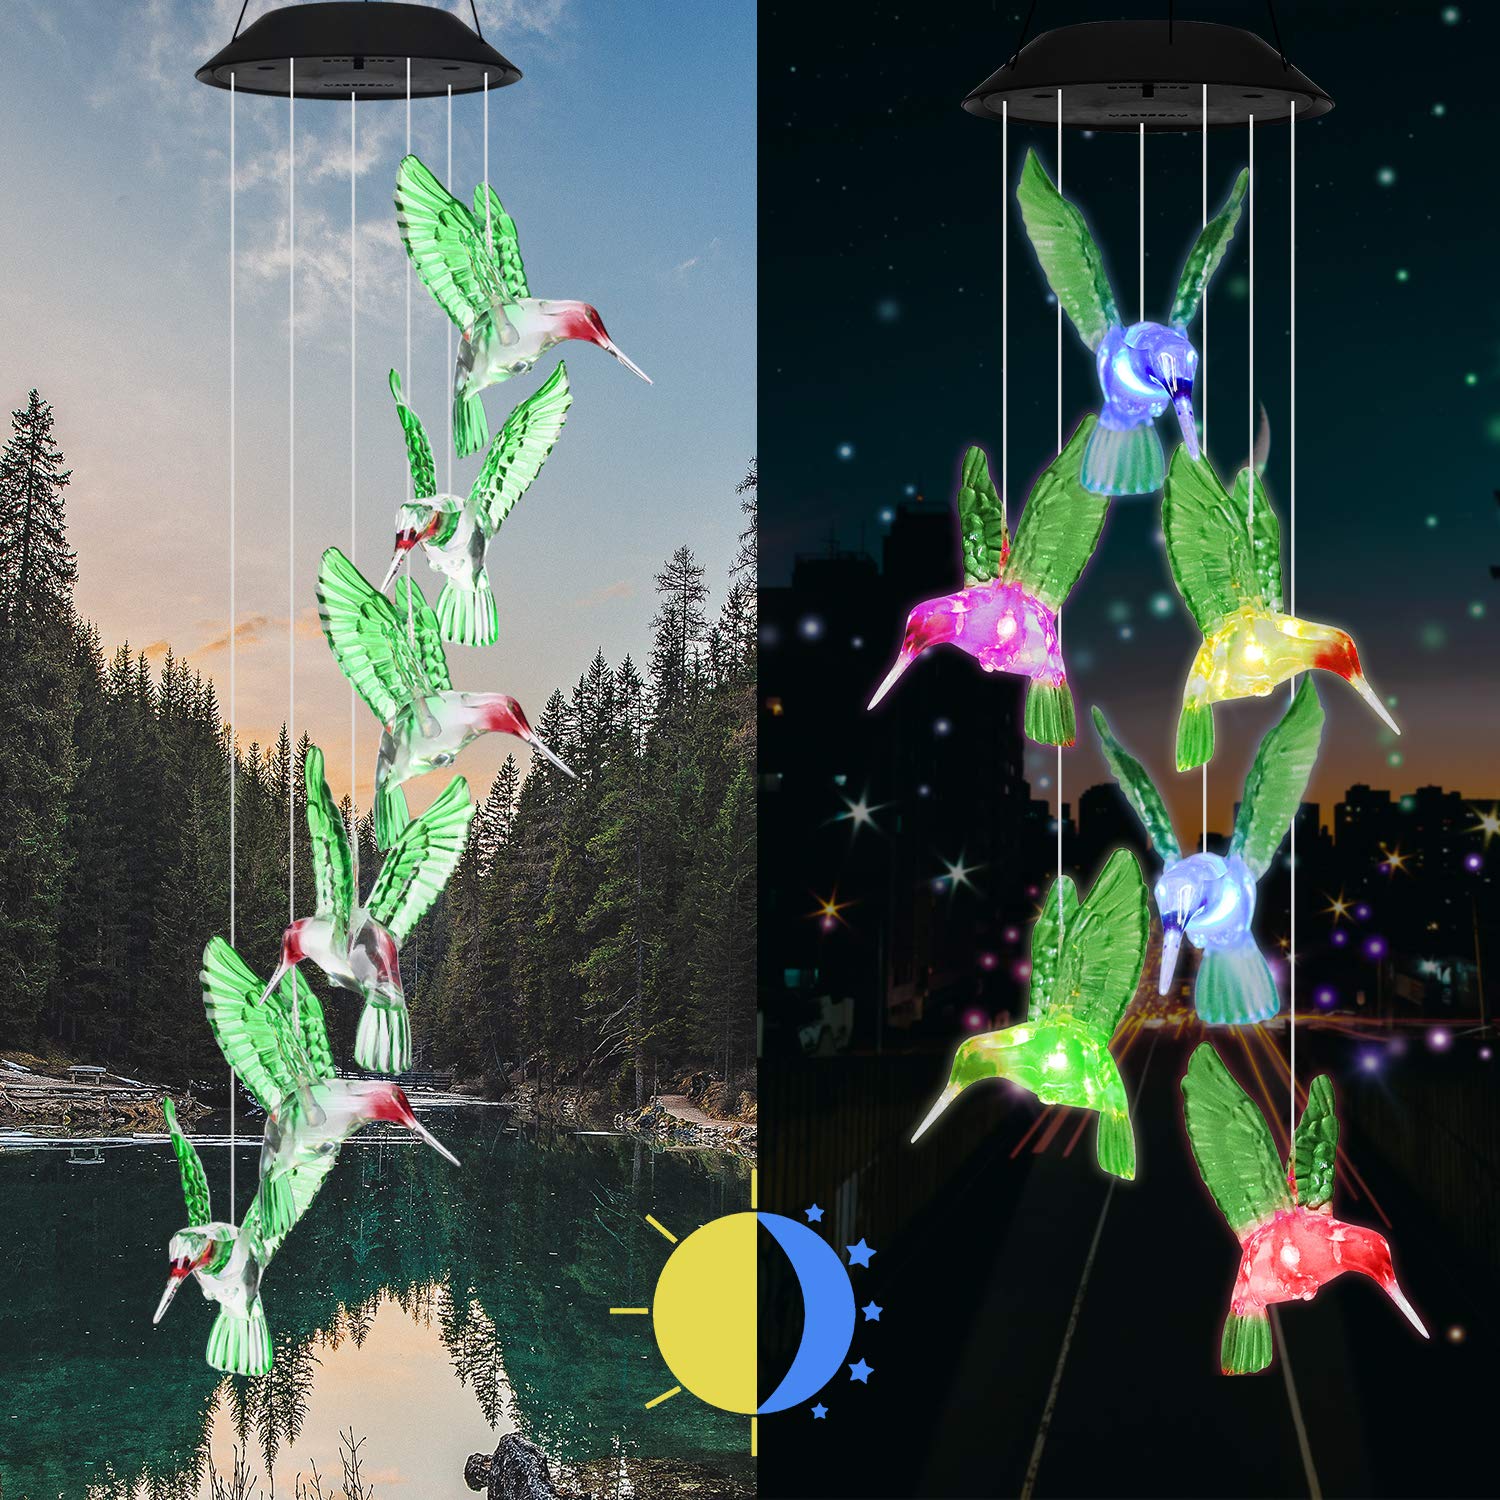 LED-Solar-Light-Waterproof-Outdoor-Hanging-Colorful-Hummingbird-Bell-Light-Wind-Chimes-Lamp-Decor-1688922